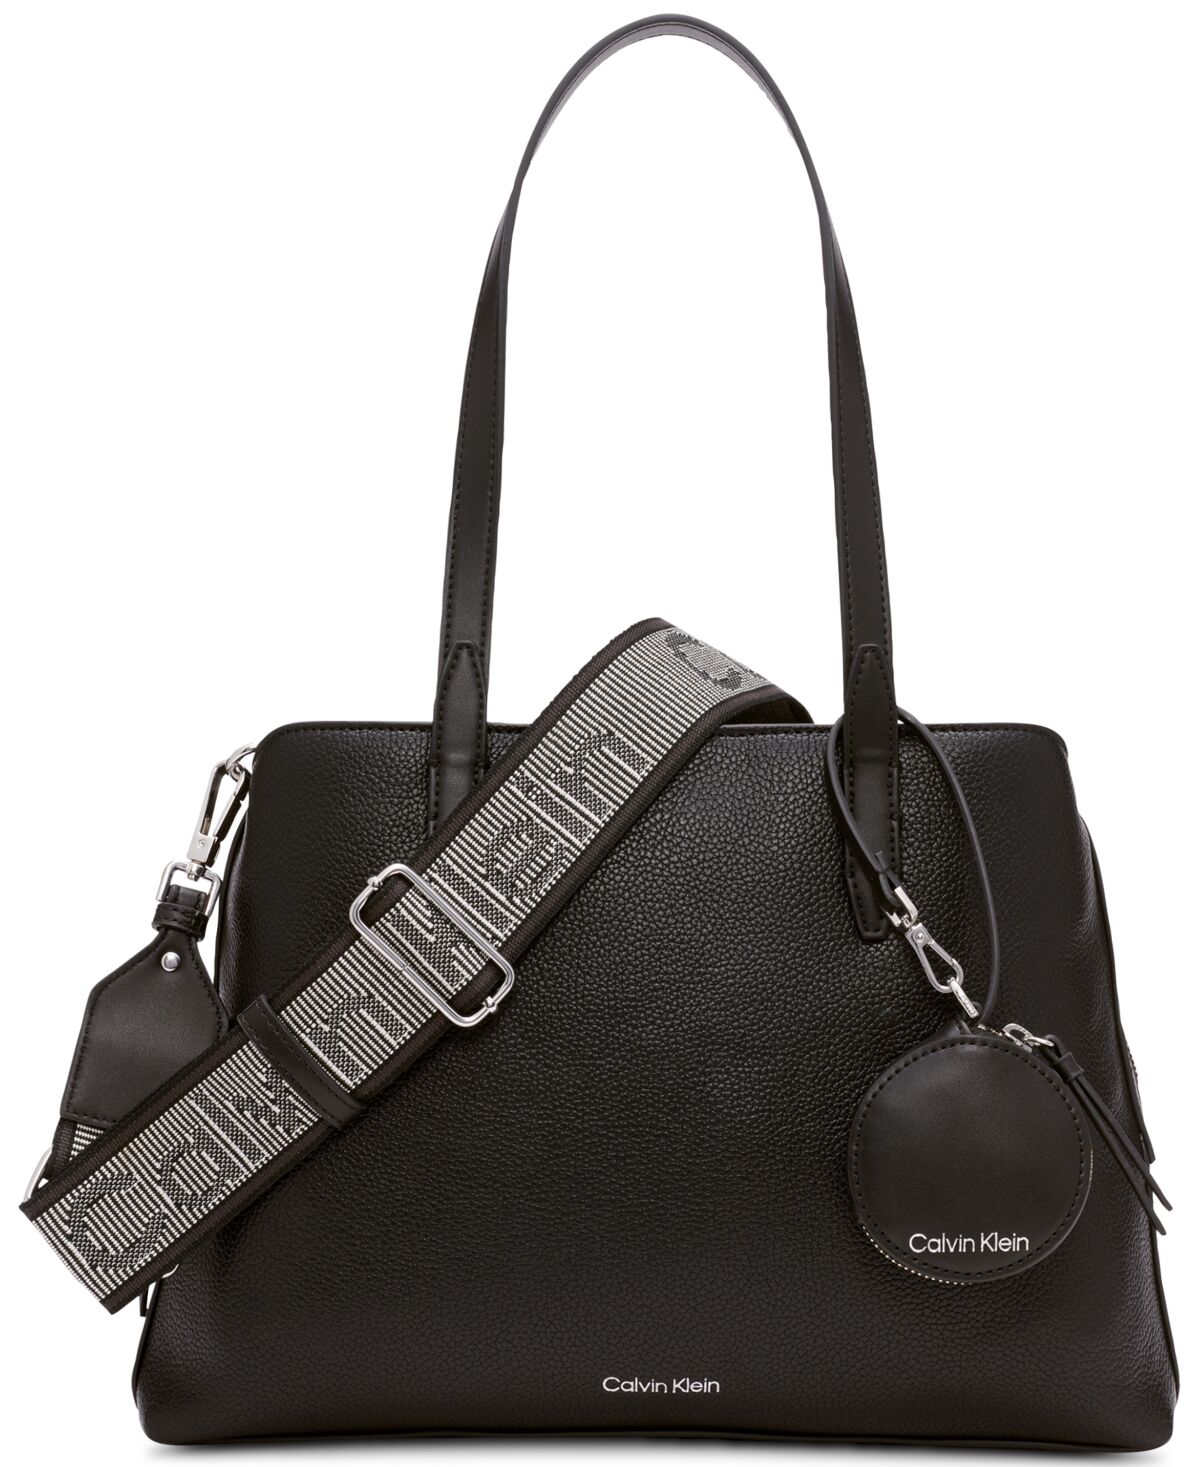 Calvin Klein Millie Convertible Tote with Coin Pouch - Black/Silver